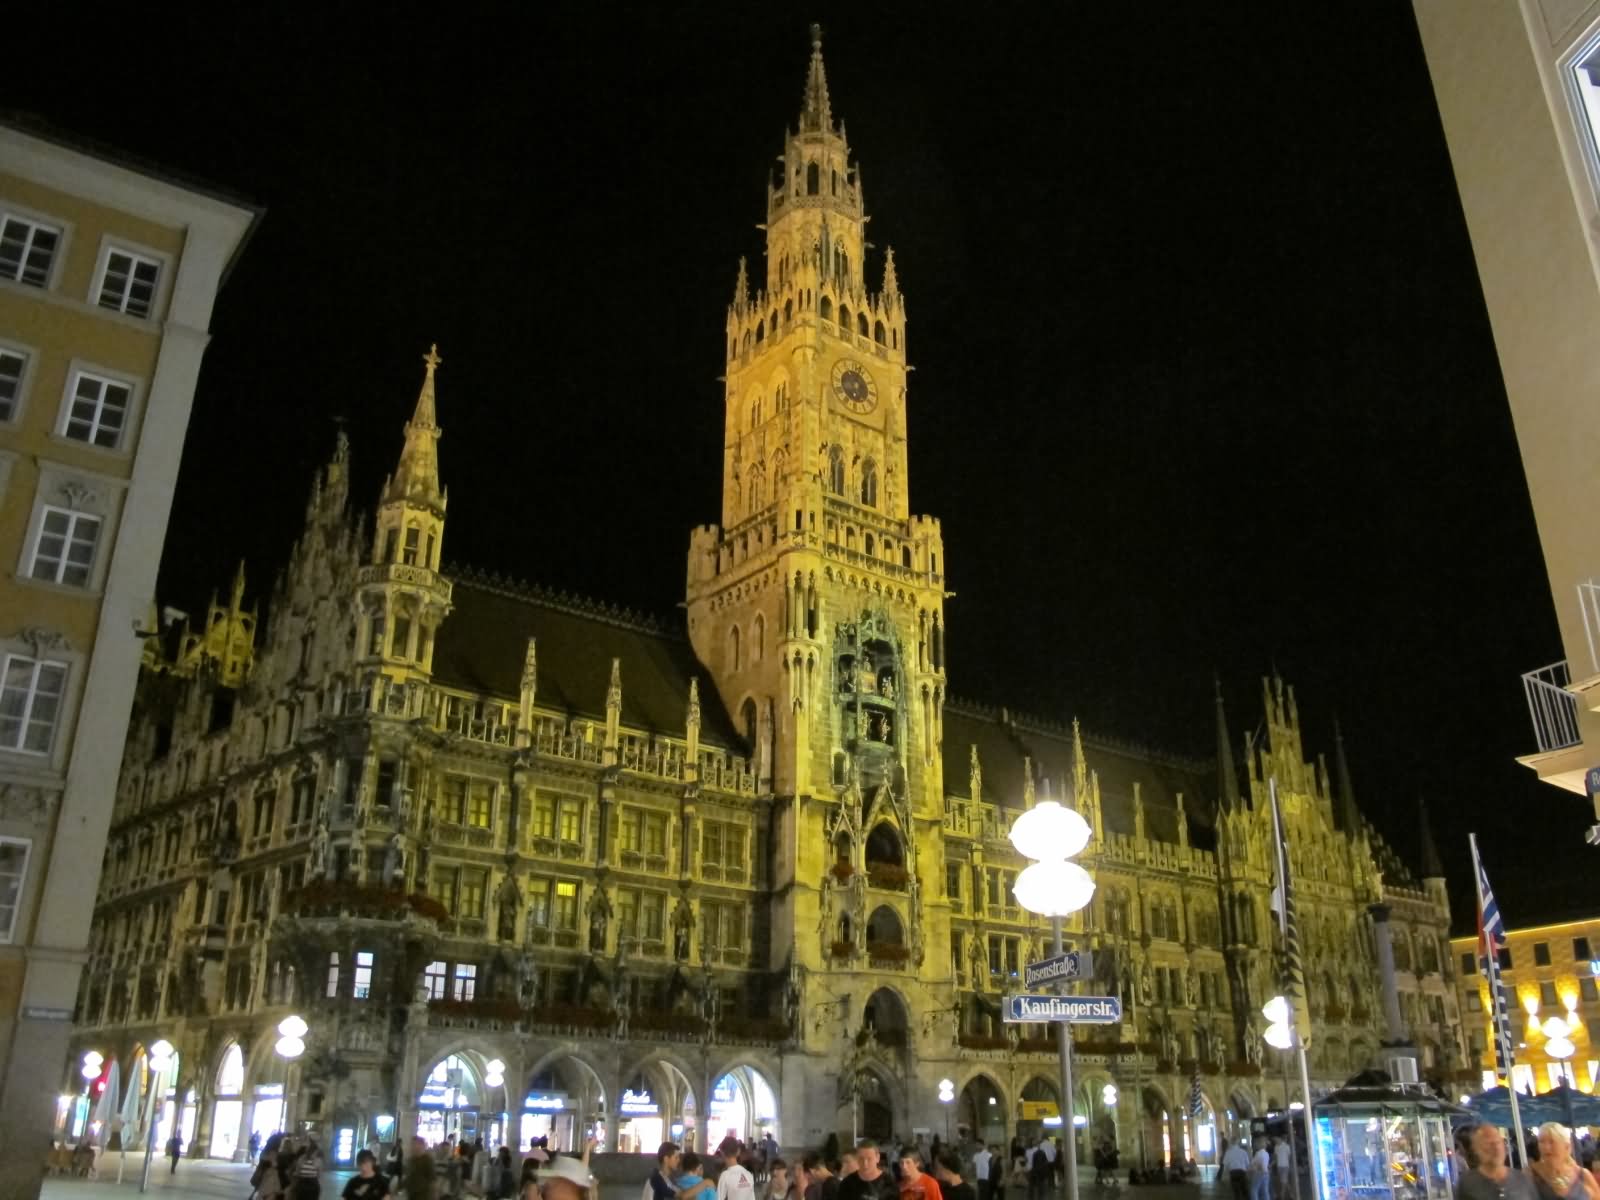 The Night View of The Neues Rathaus In Germany